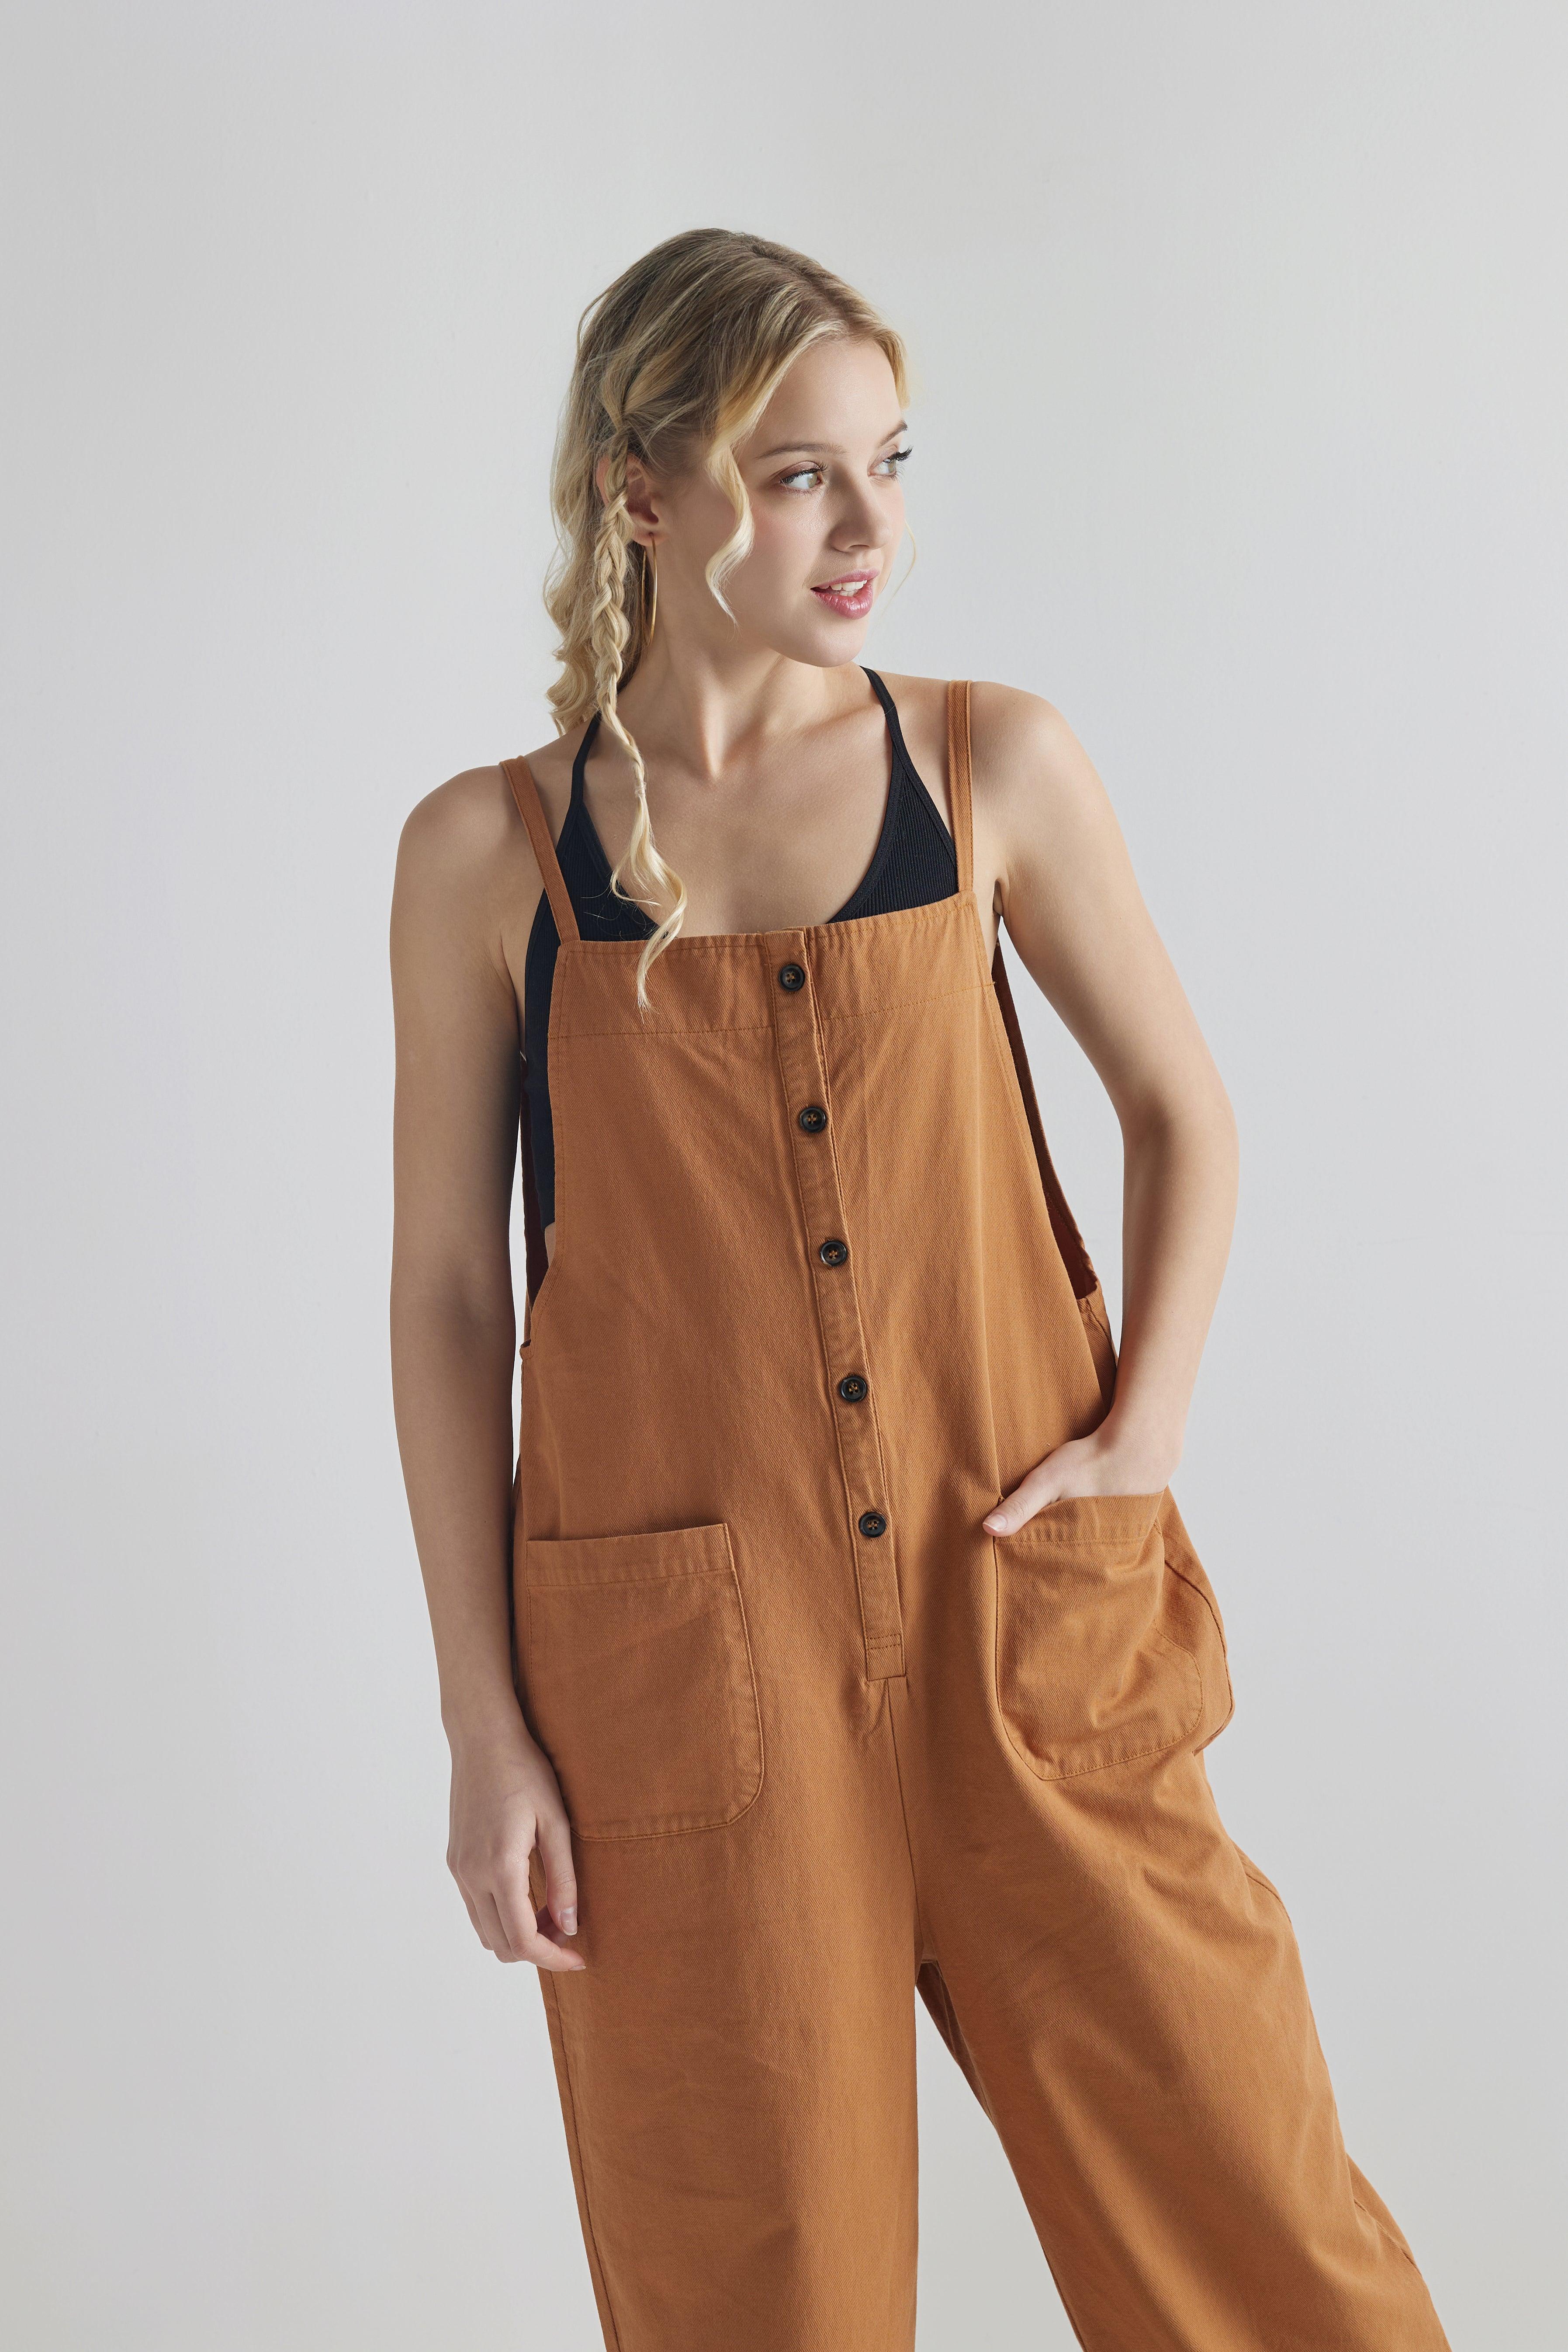 100% cotton Button Down Sleeveless Overalls Jumpsuit with Pockets - Camel - noflik